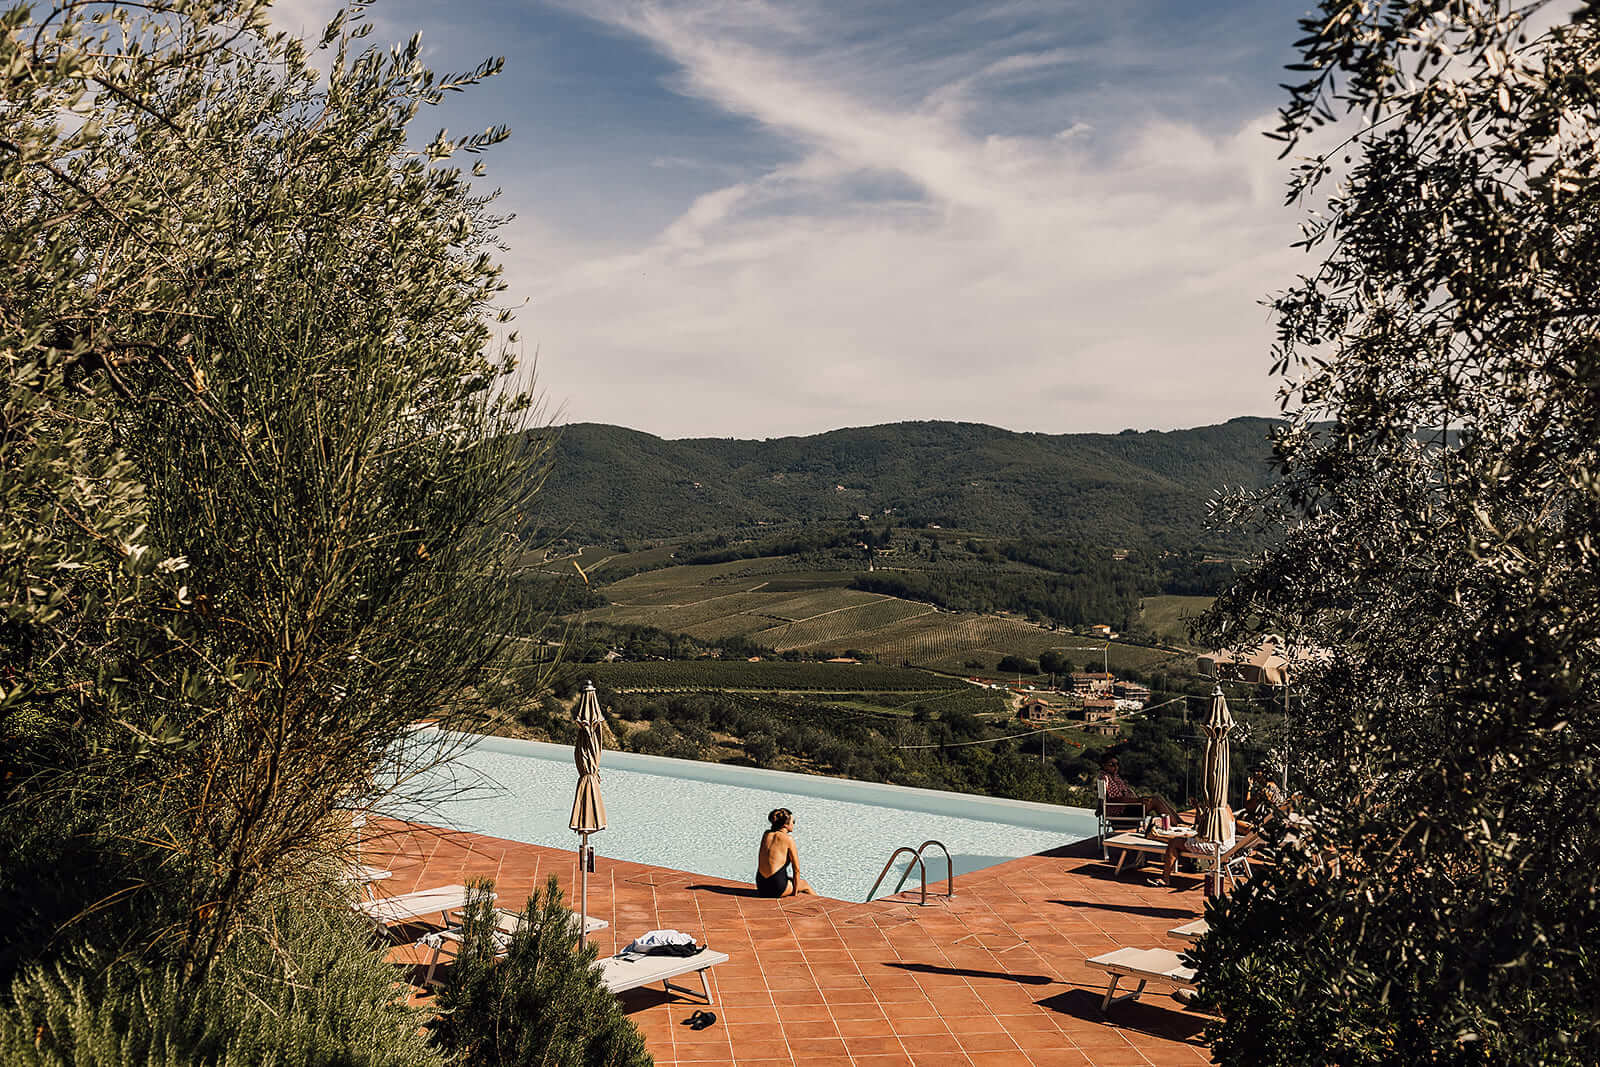 The bride enjoys the swimming pool before the wedding with a wonderful view on tuscan countryside